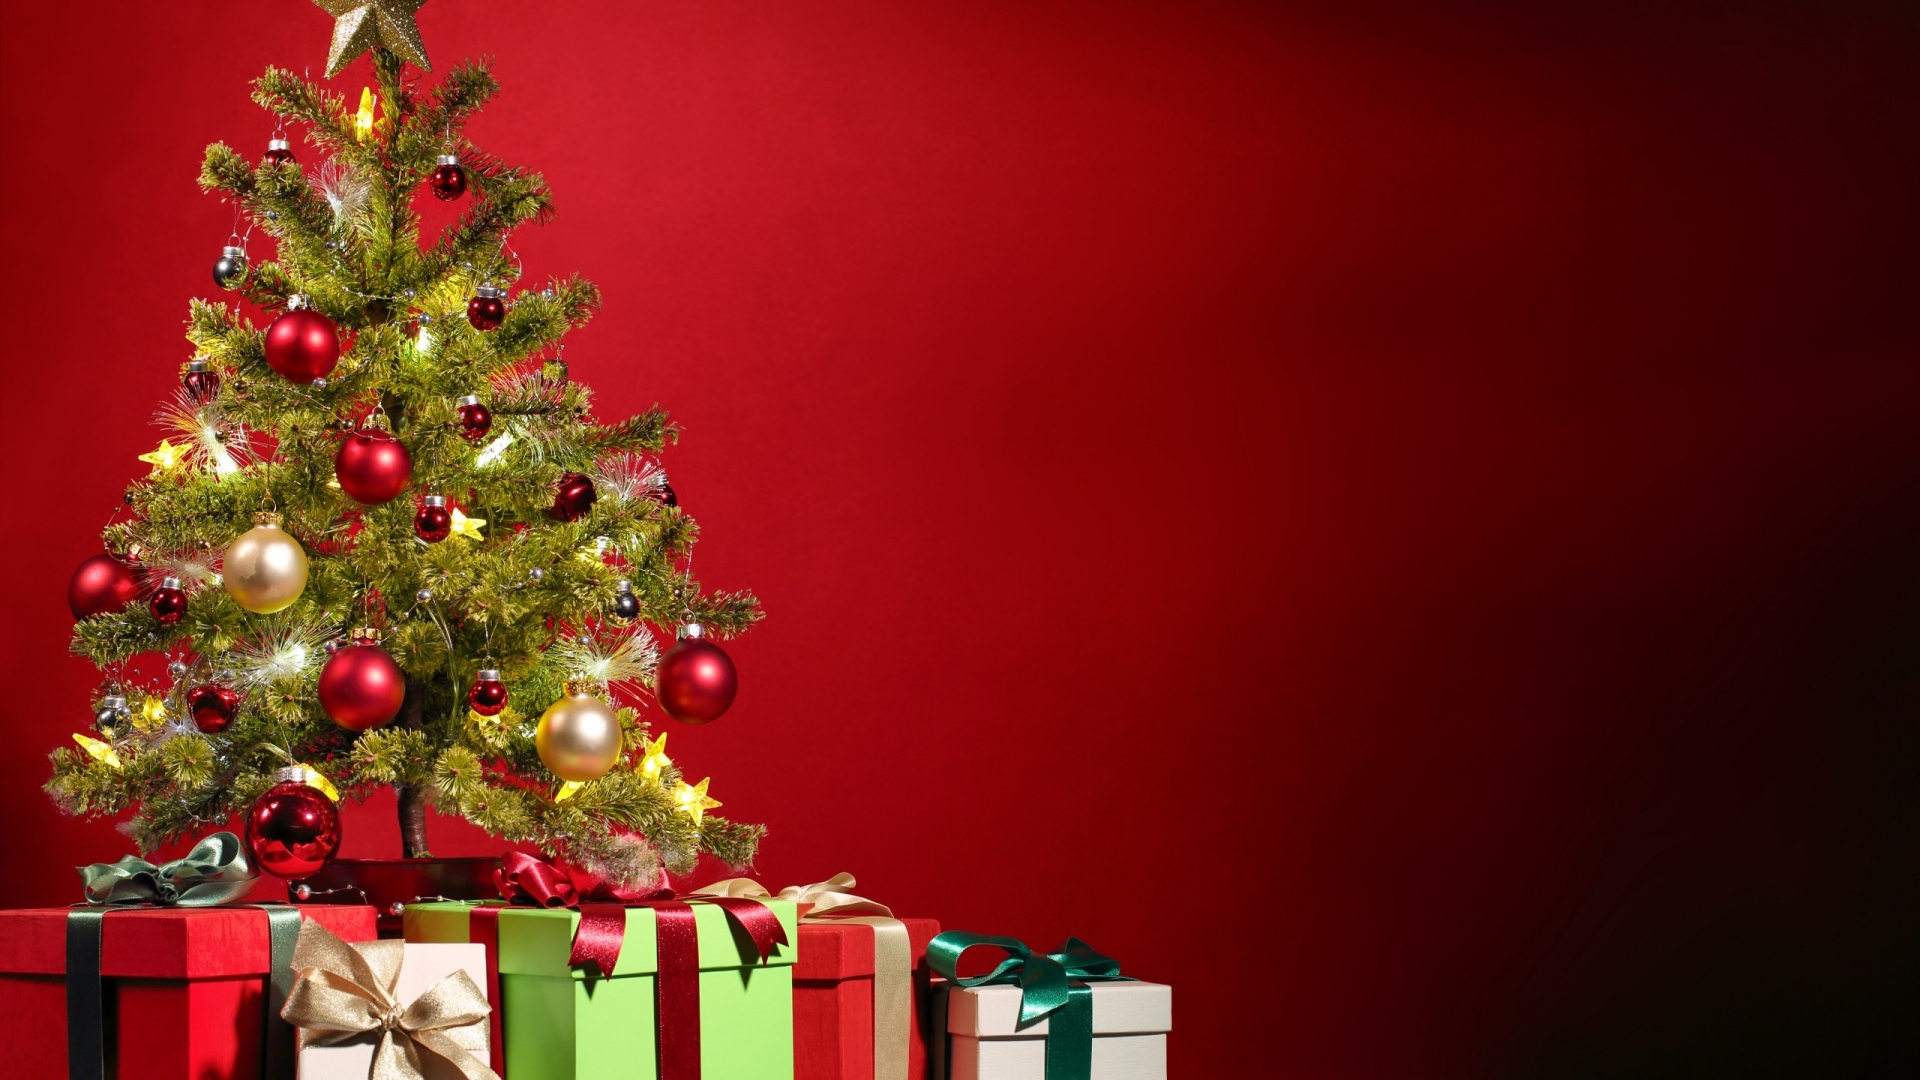 Special Christmas Tree and Gifts for 1920 x 1080 HDTV 1080p resolution